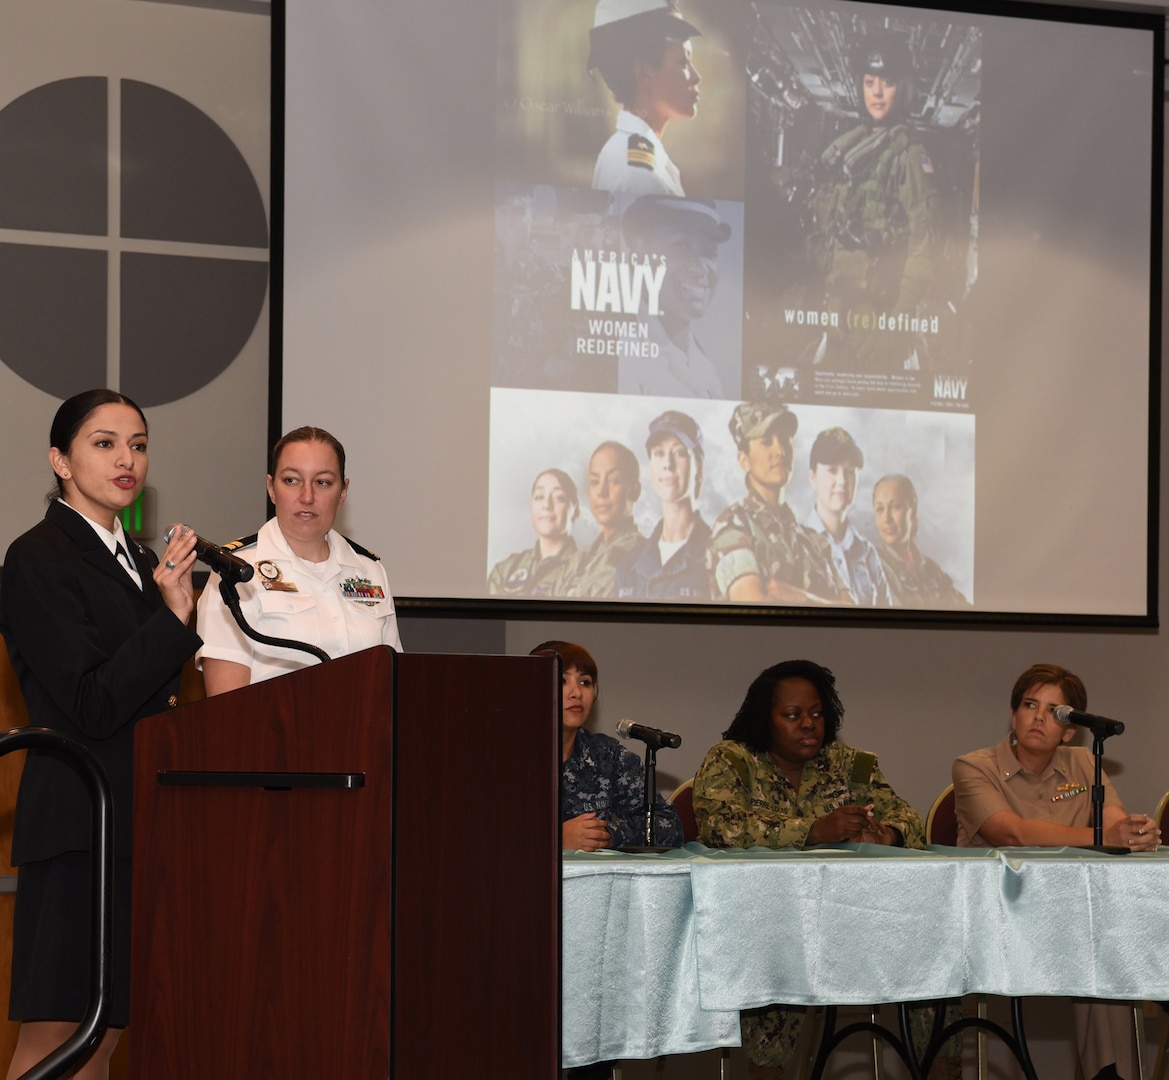 Chief Petty Officer Isabel Guerrero, Division 6 leading chief petty officer, is joined by Division 6 officer Lt. Amy Zabel, both assigned to Navy Recruiting District San Antonio, to address more than 80 future Sailors, parents and supporters during an All-Female Delayed Entry Program and Key Influencer Meeting held at the Rosenberg Sky Room on the campus of the University of the Incarnate Word in San Antonio.